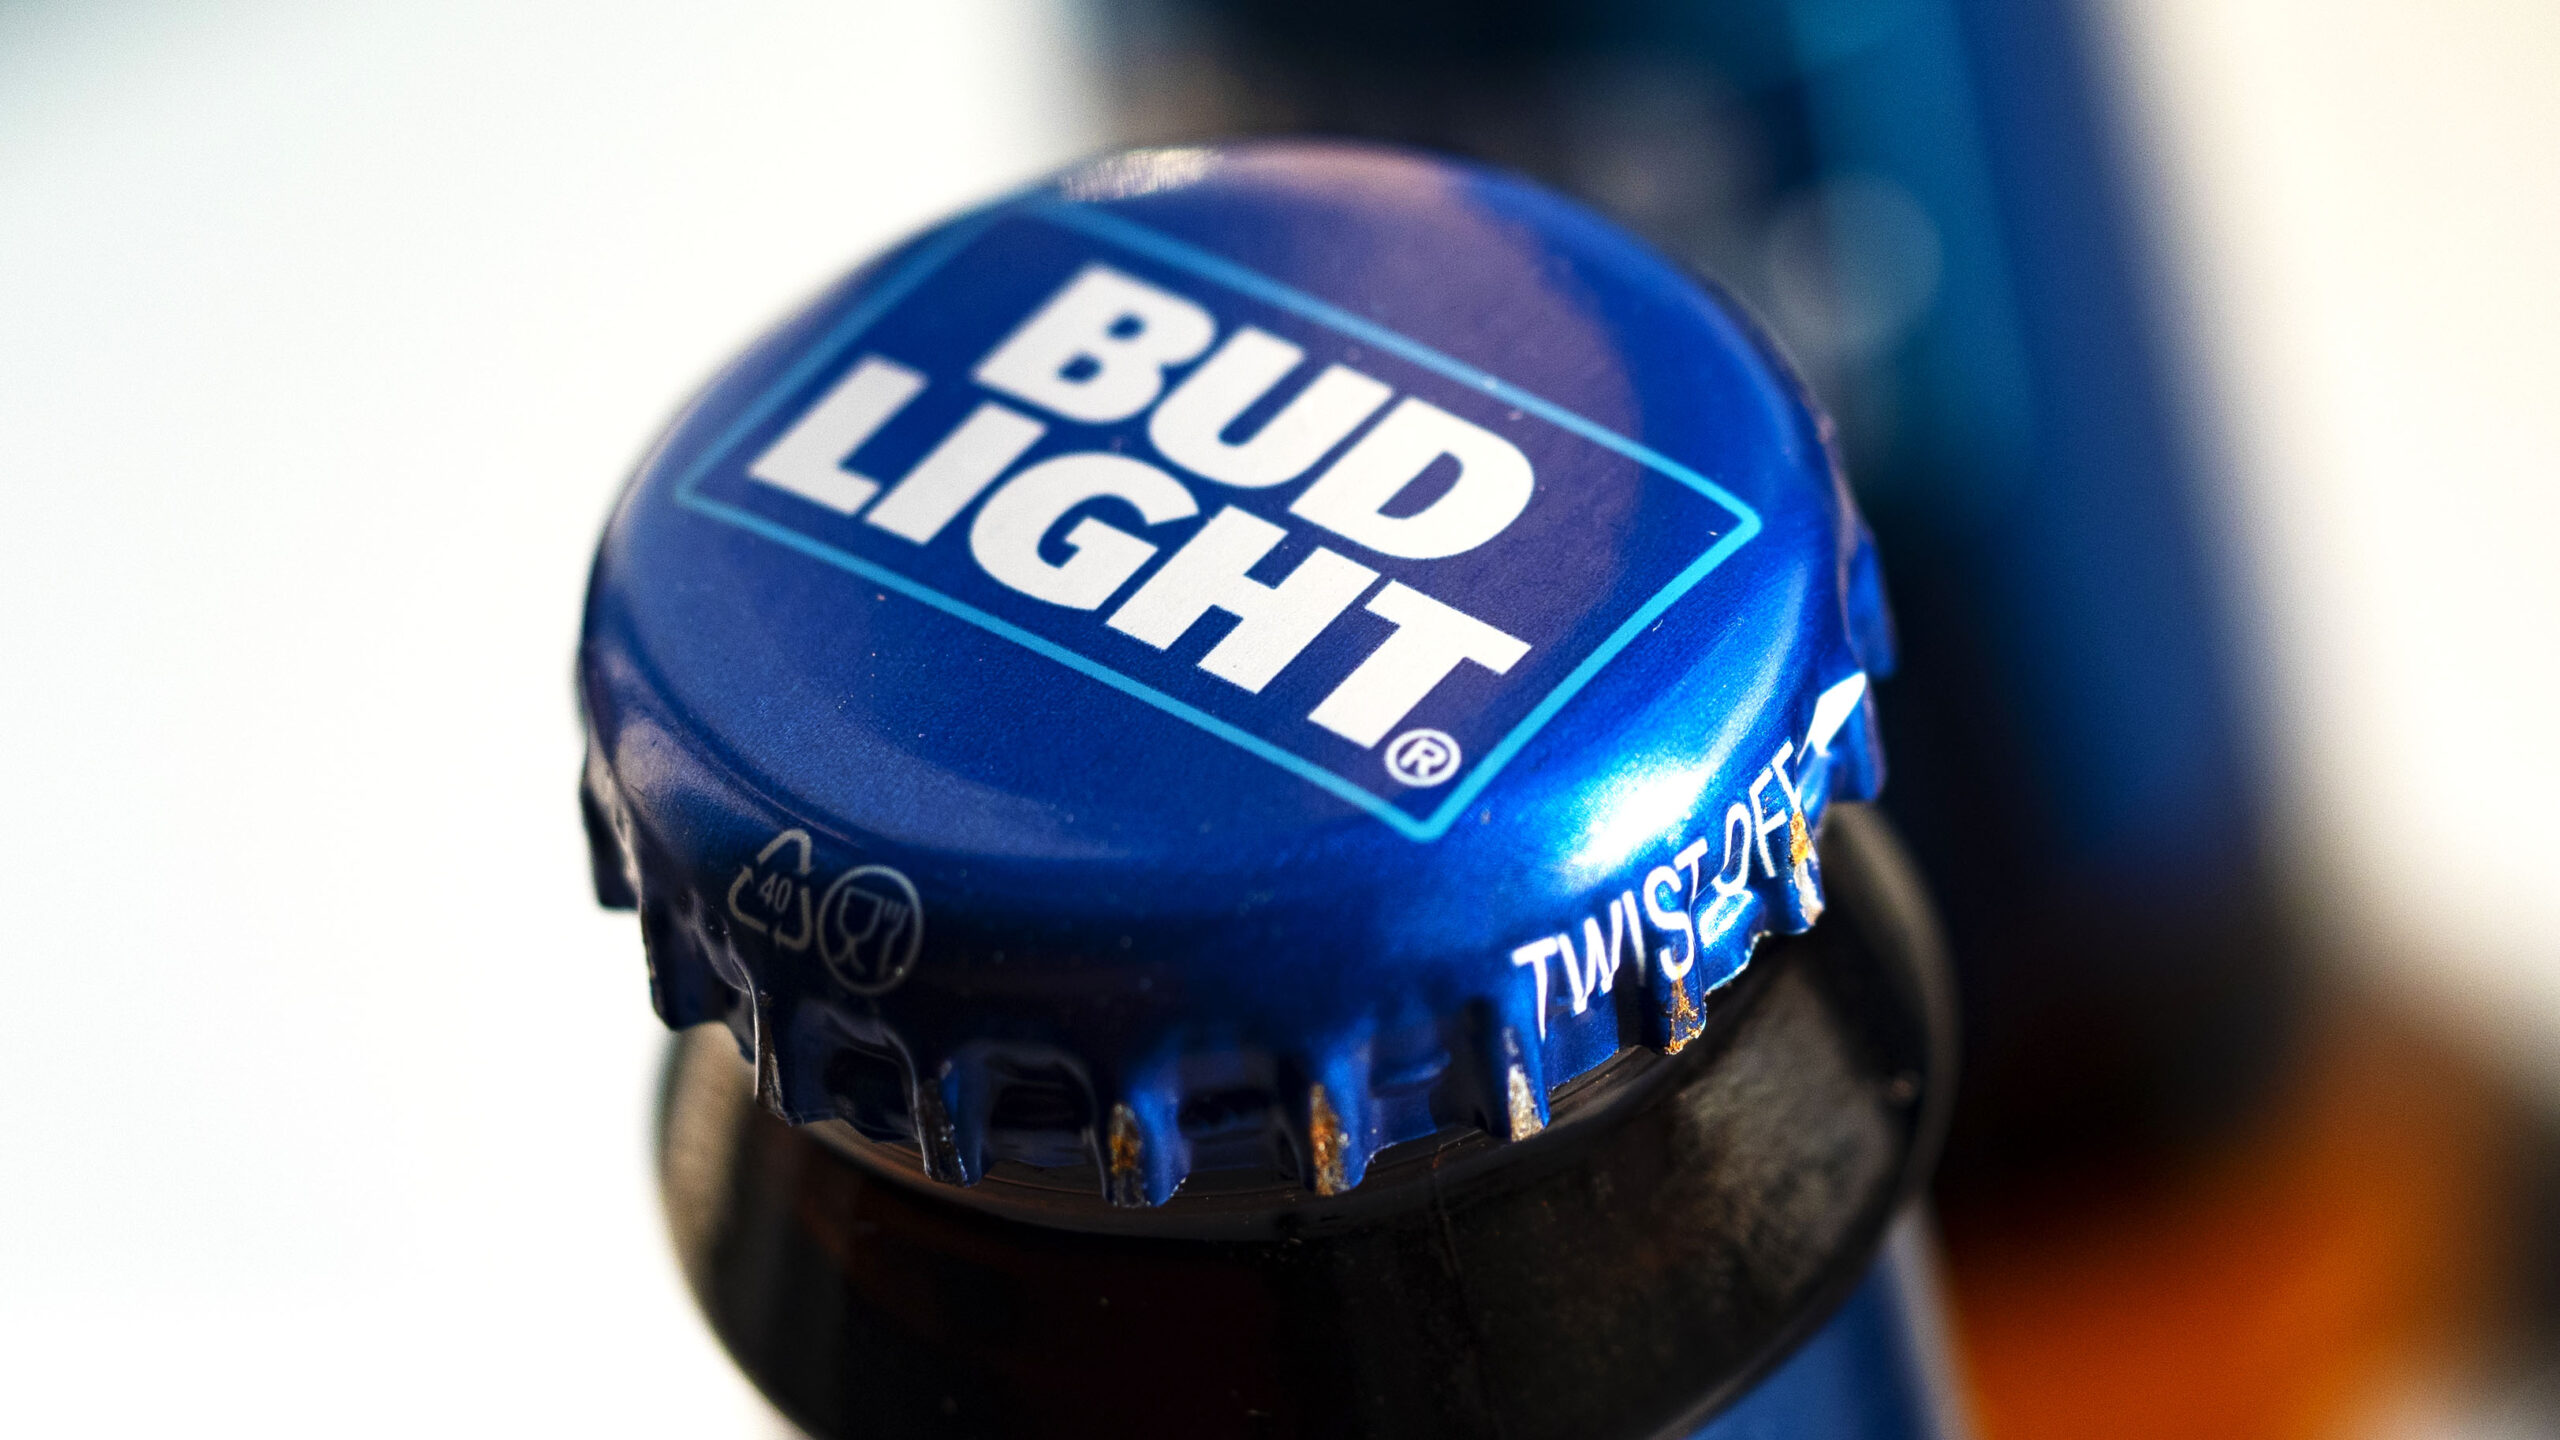 Numbers Show Bud Light Parent Company Has Lost Significant Market Value Since Trans Influencer Controversy